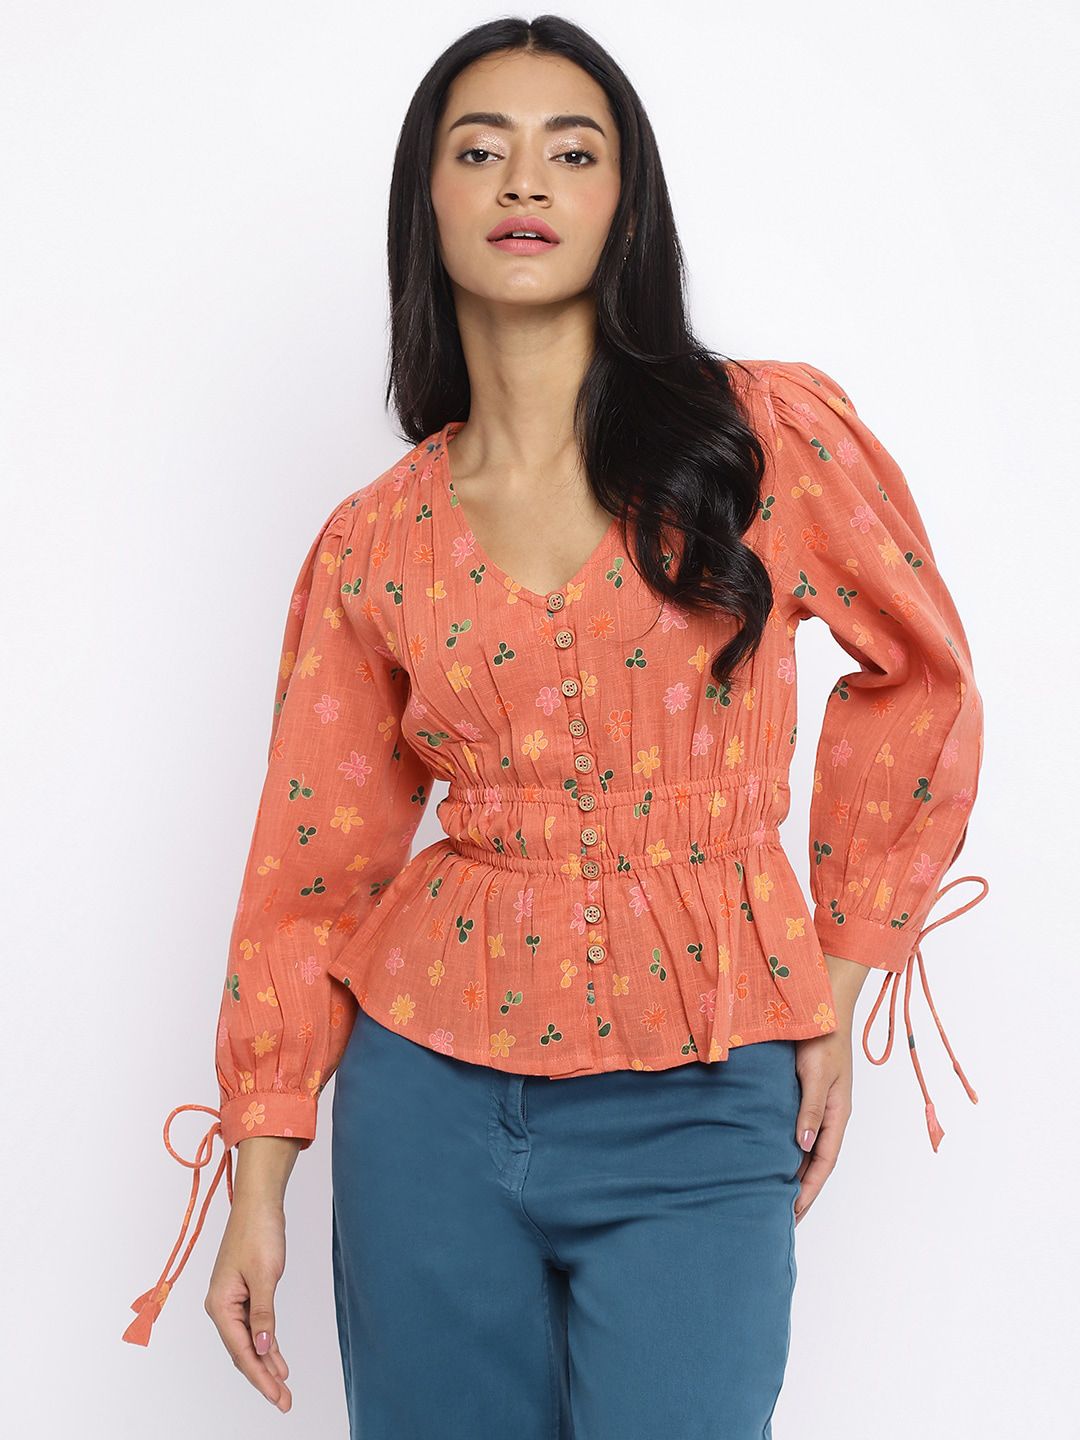 Fabindia Floral Printed Cinched Waist Cotton Top Price in India